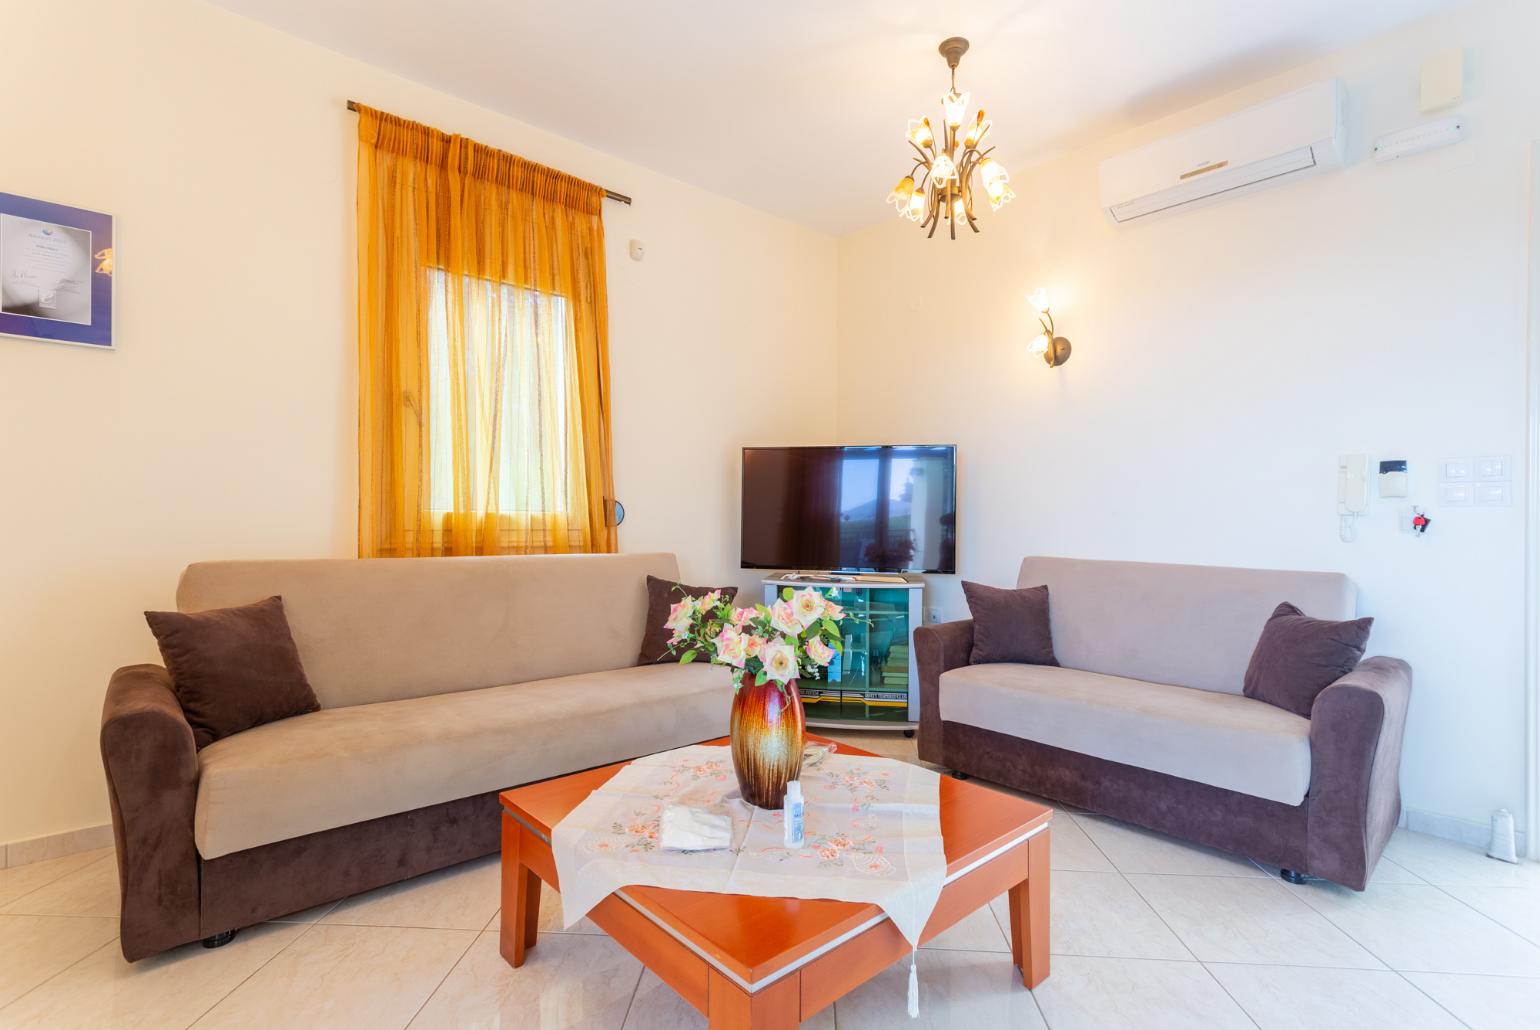 Open-plan living room with sofas, dining area, kitchen, A/C, WiFi internet, satellite TV, DVD player, and terrace access